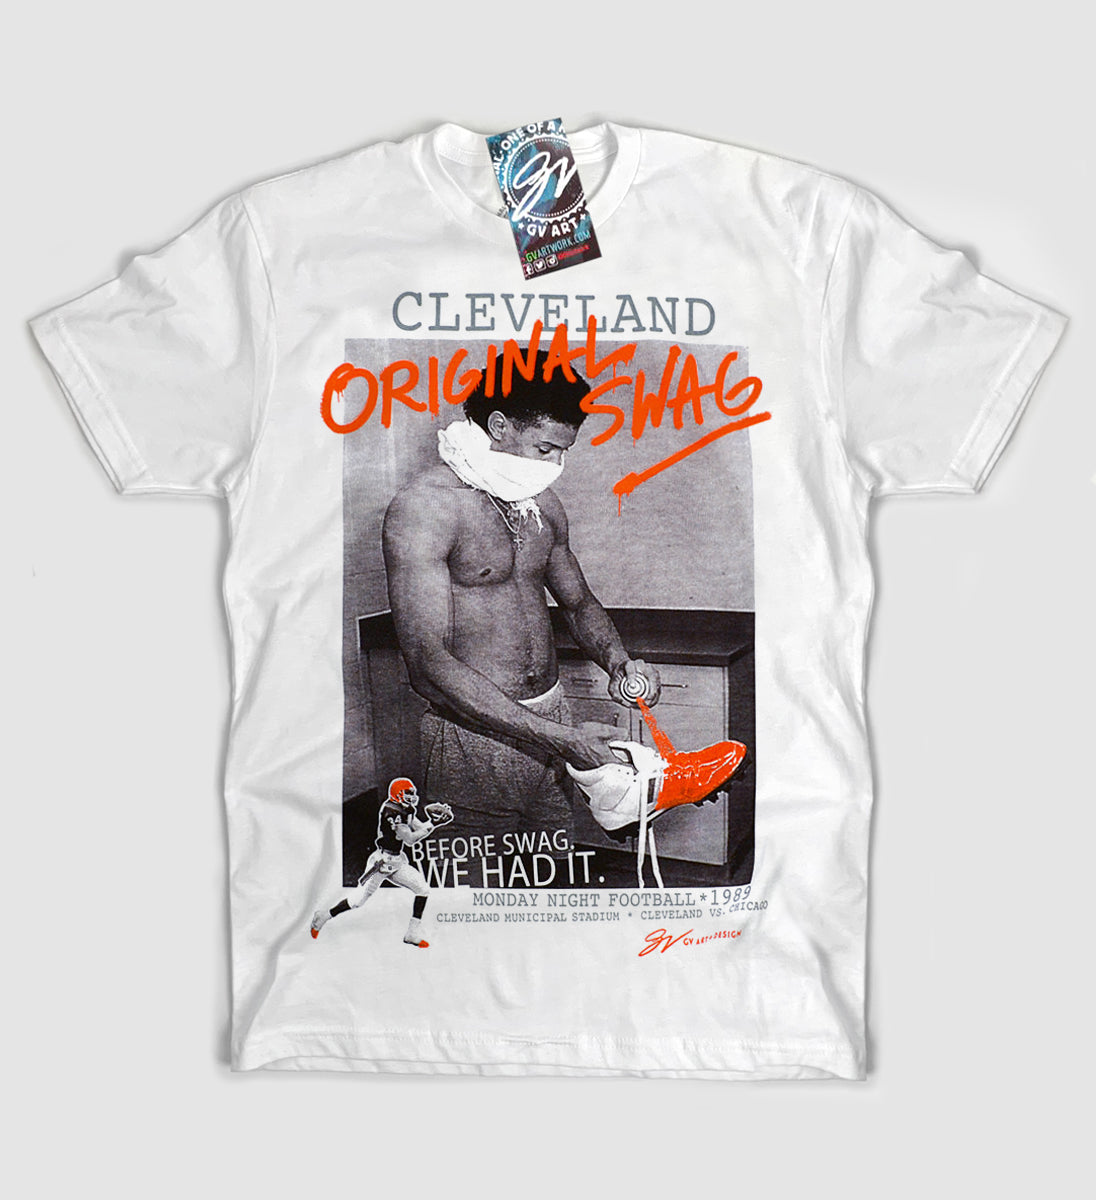 GV Art Cleveland Footbal Small Shirt - Browns colors Guardians Of